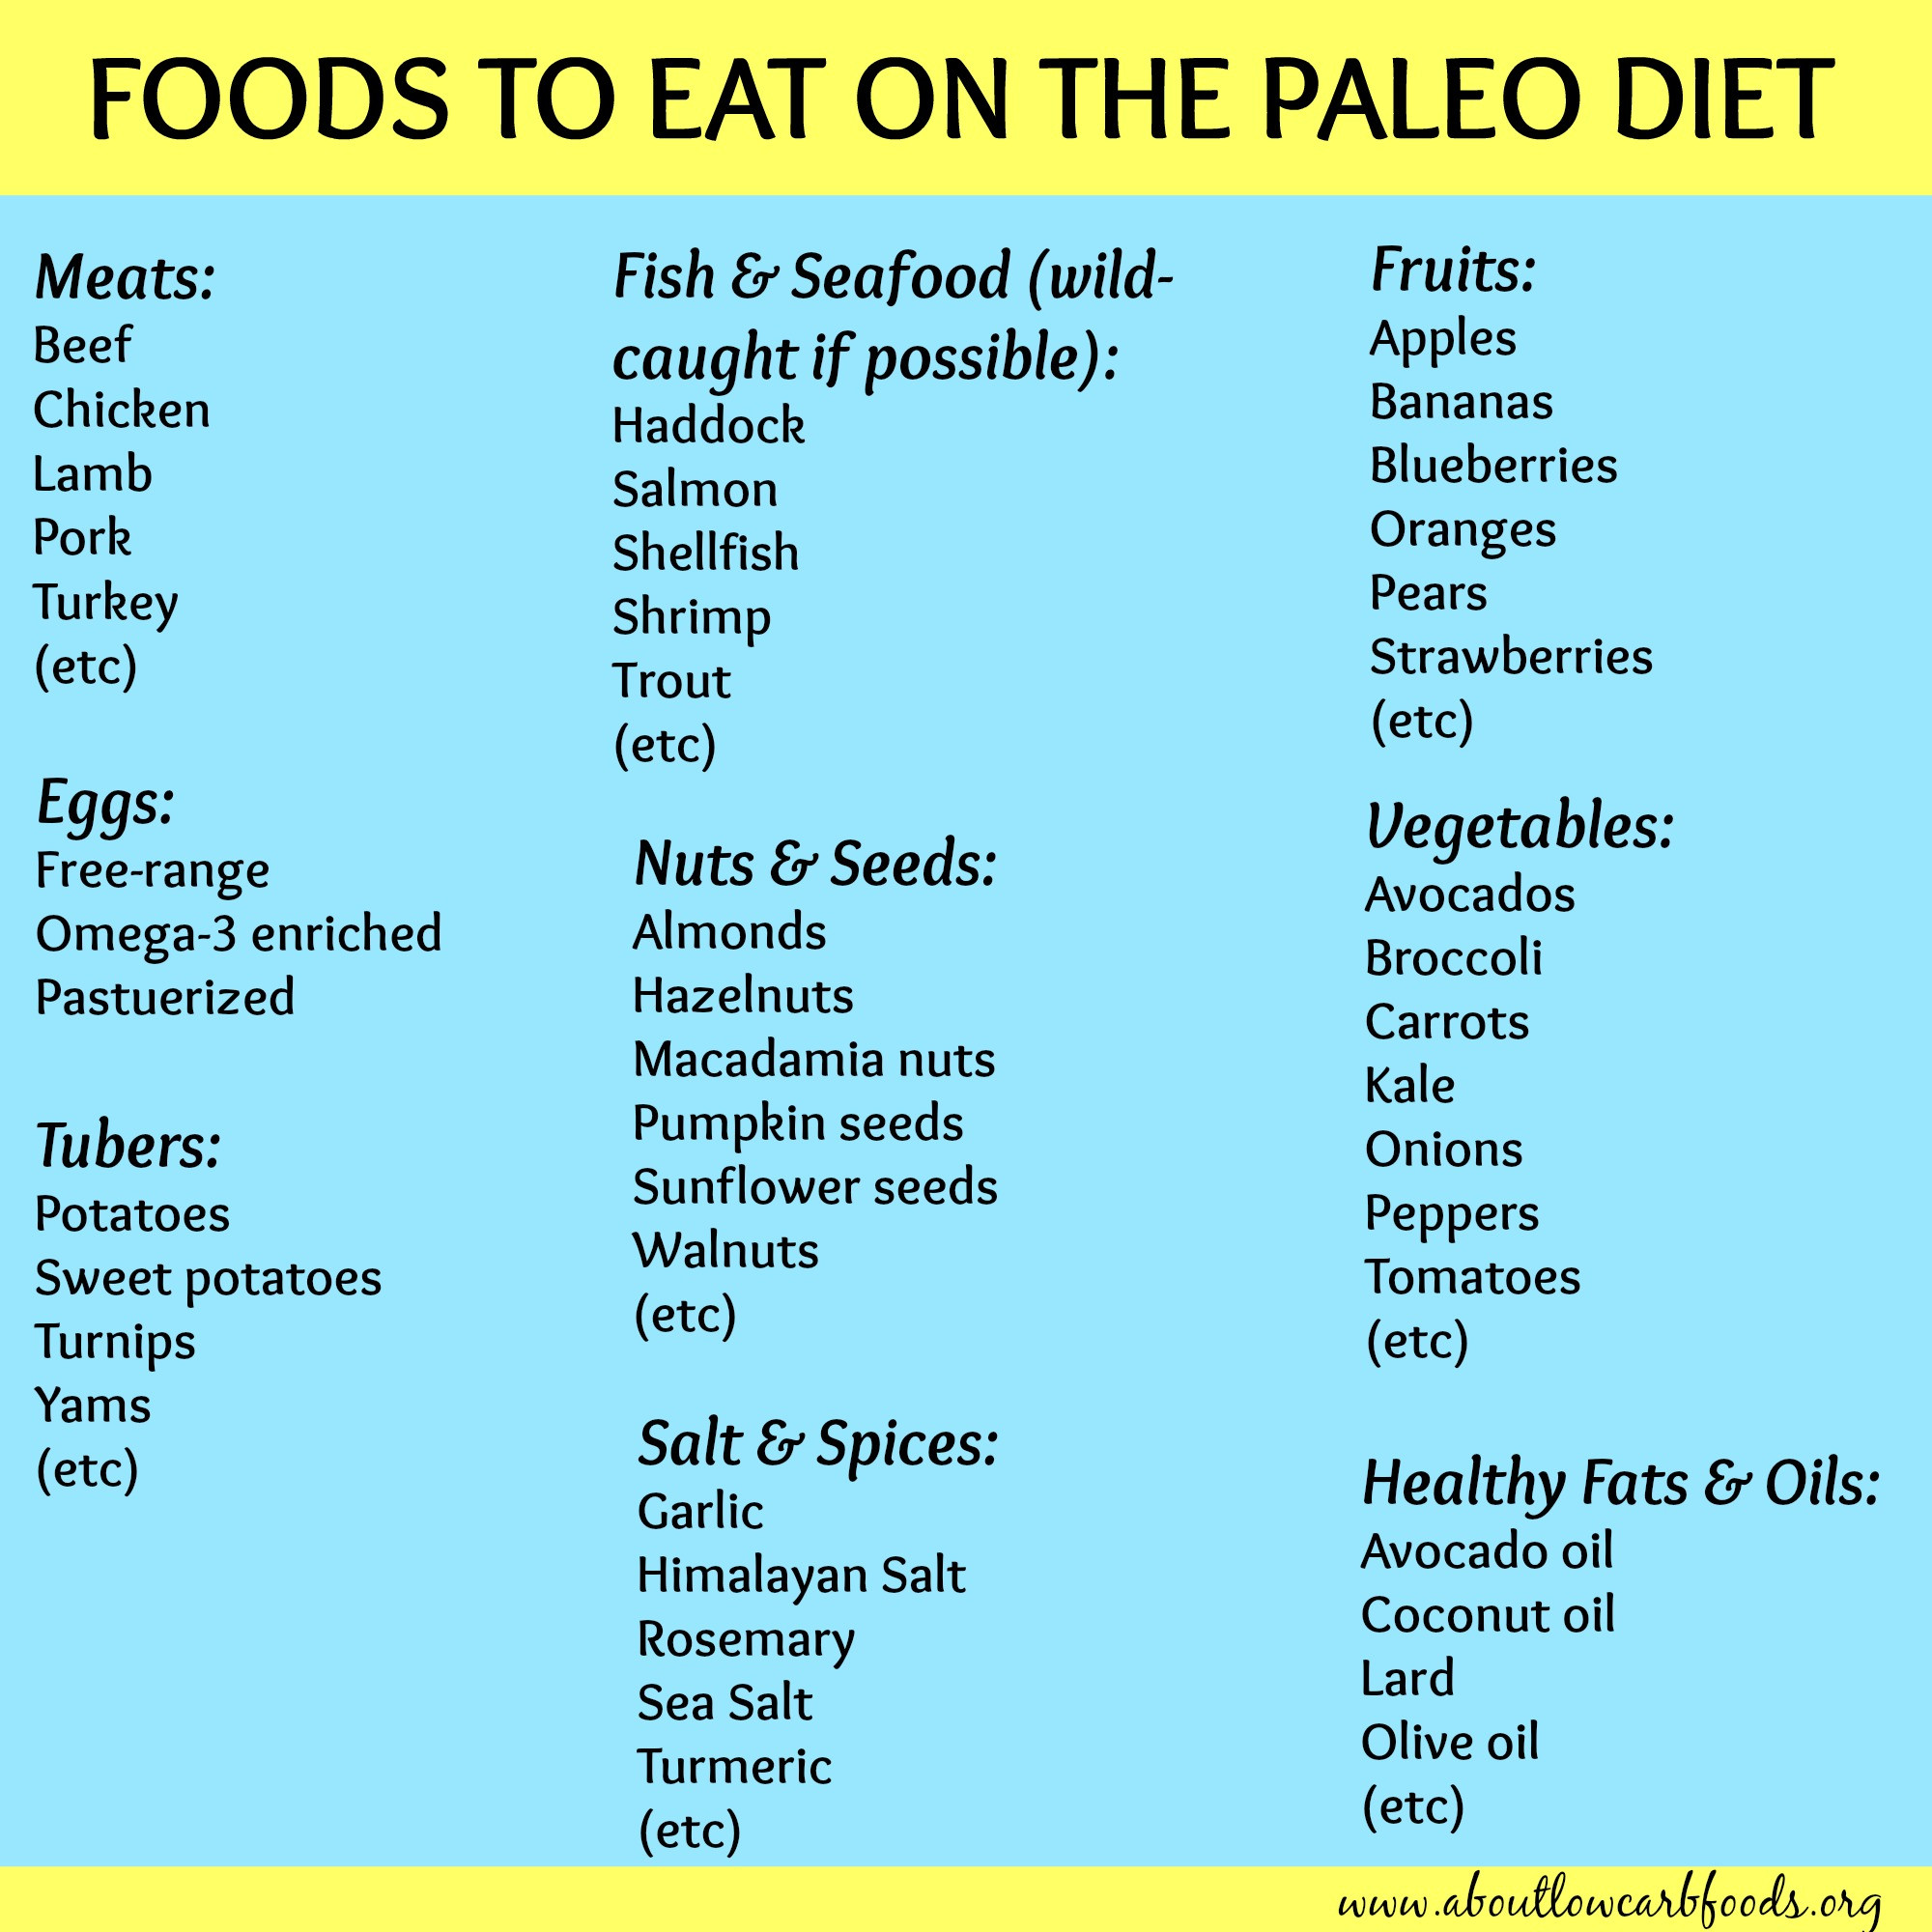 Paleo Diet Meal Plan For Weight Loss Pdf
 Paleo Diet Meal Plan Why It’s So Popular About Low Carb